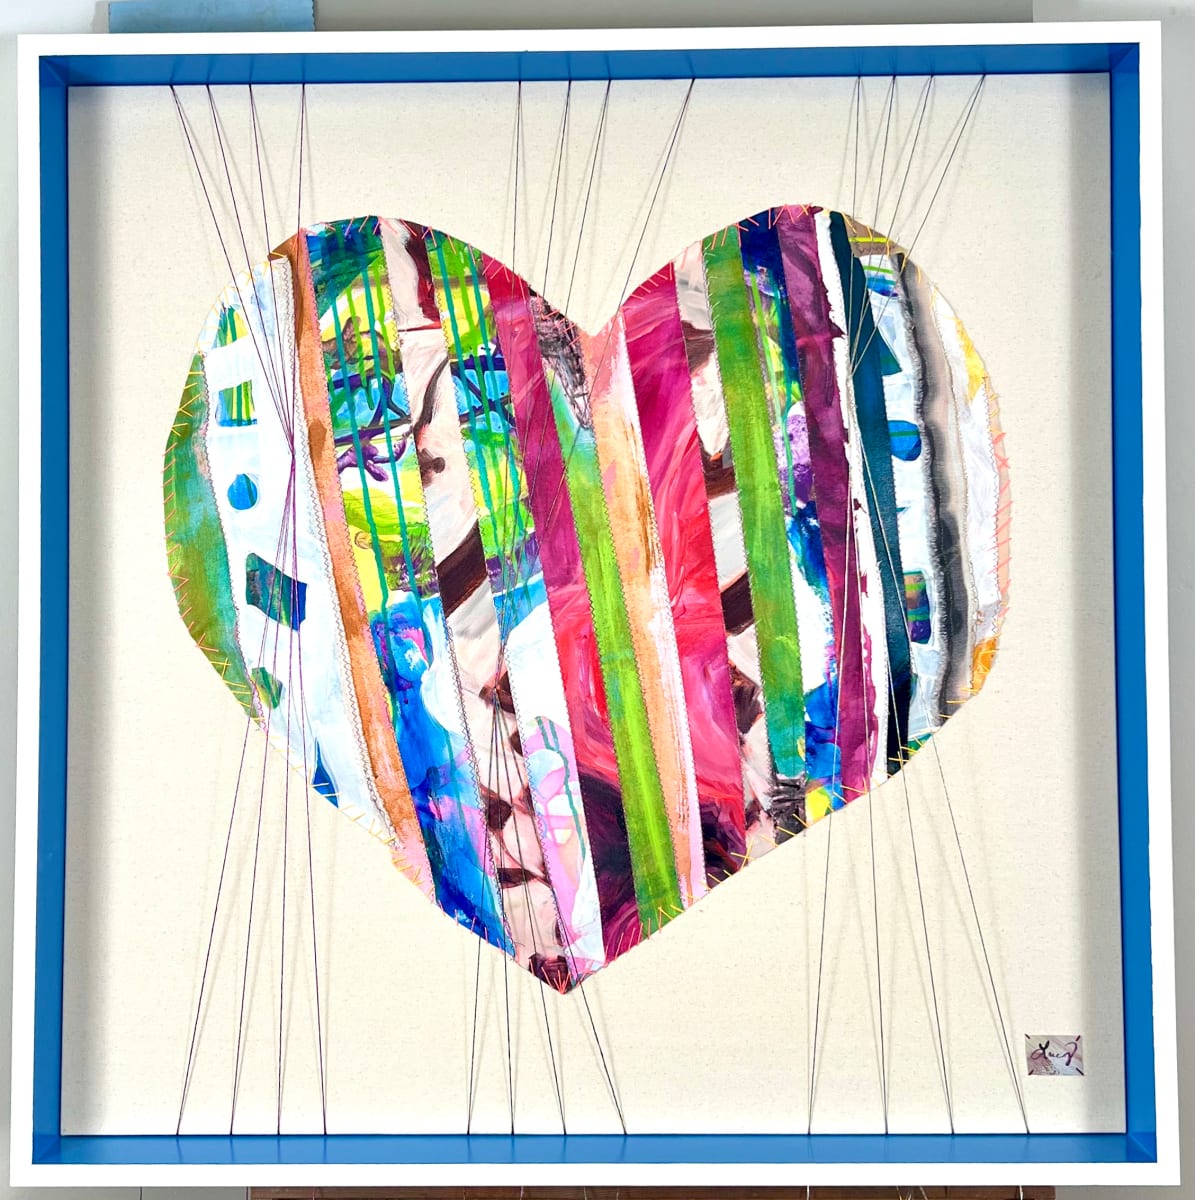 Patchwork Heart 1 by Lucy Boland 